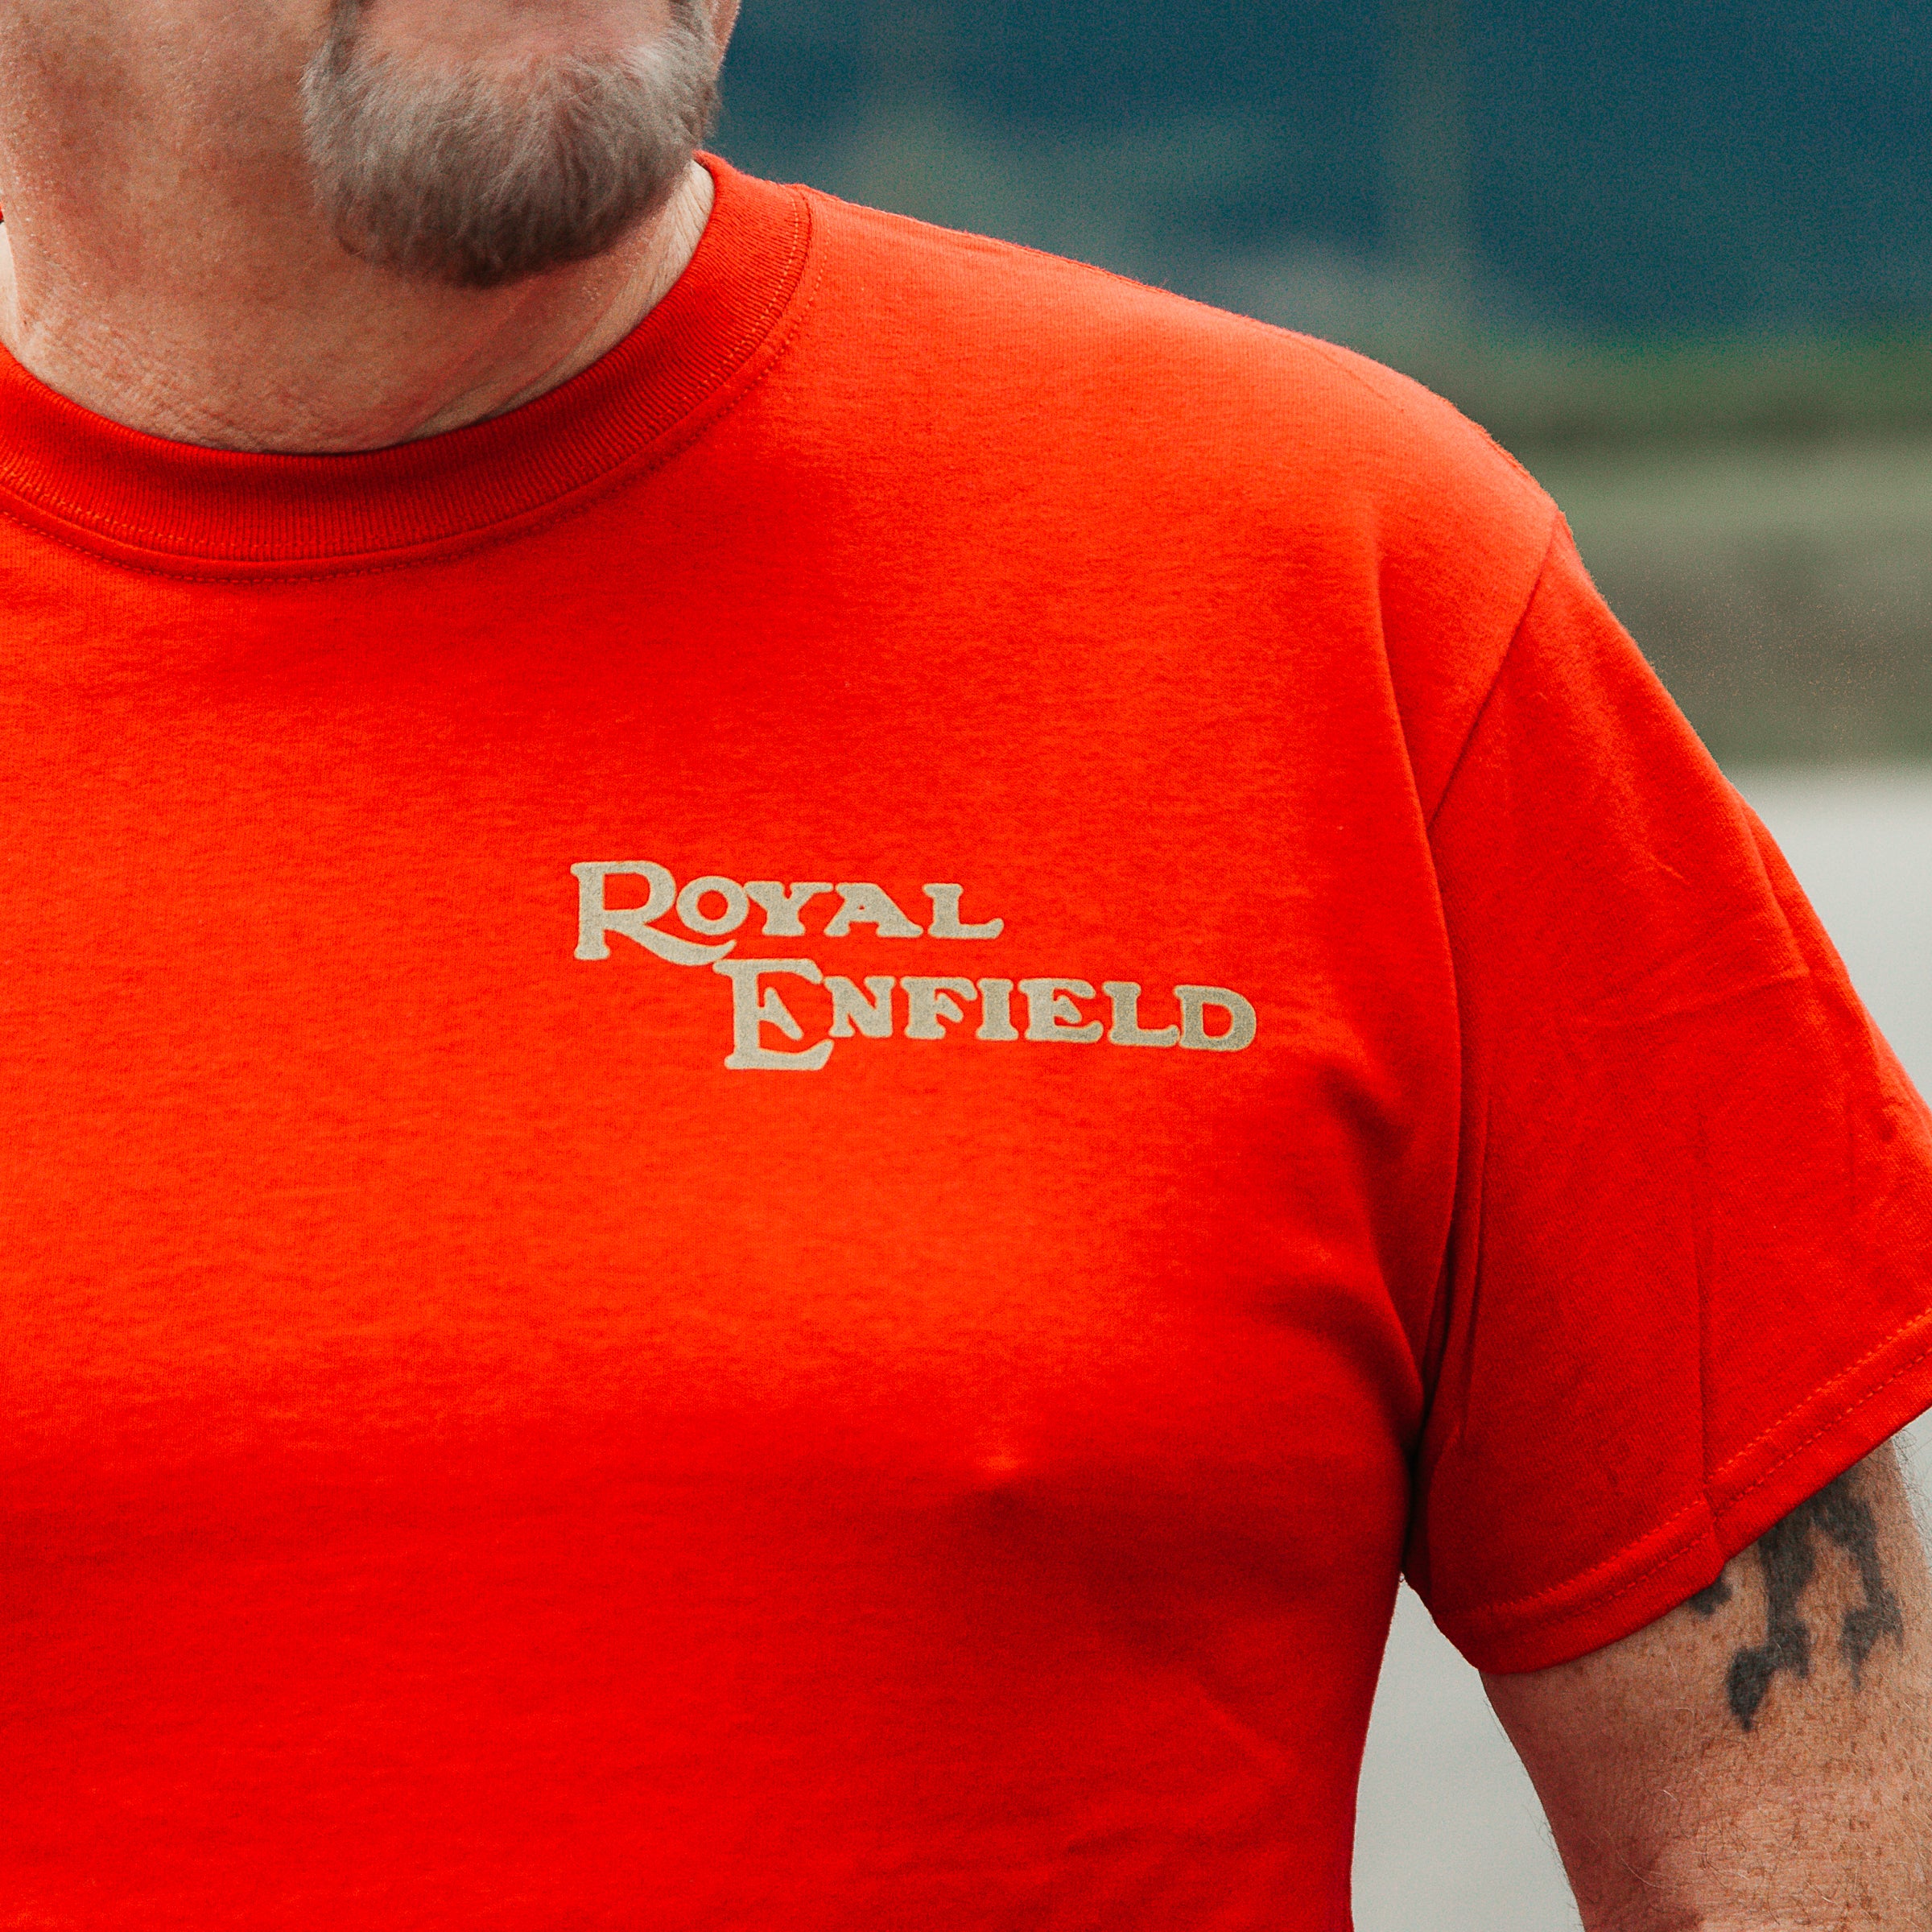 Dreamcycle Motorcycle Museum |  Models shoulder wearing royal enfield shirt in lifestyle setting.  